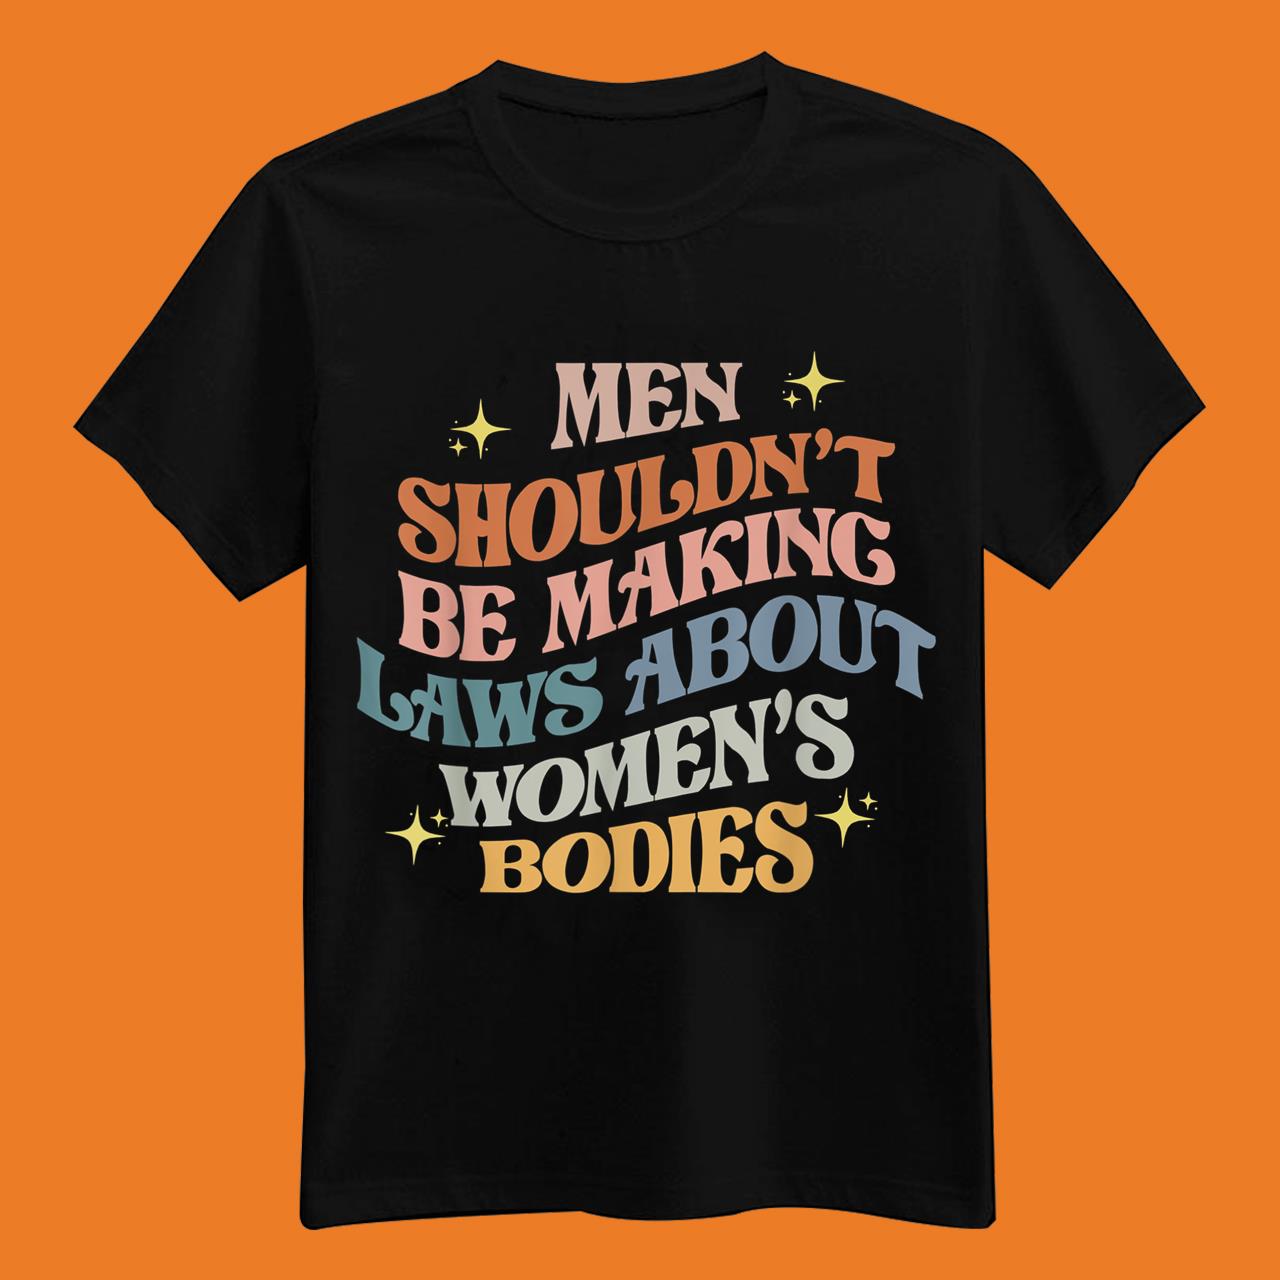 Men Shouldn’t Be Making Laws About Bodies Feminist Women Rights T-Shirt